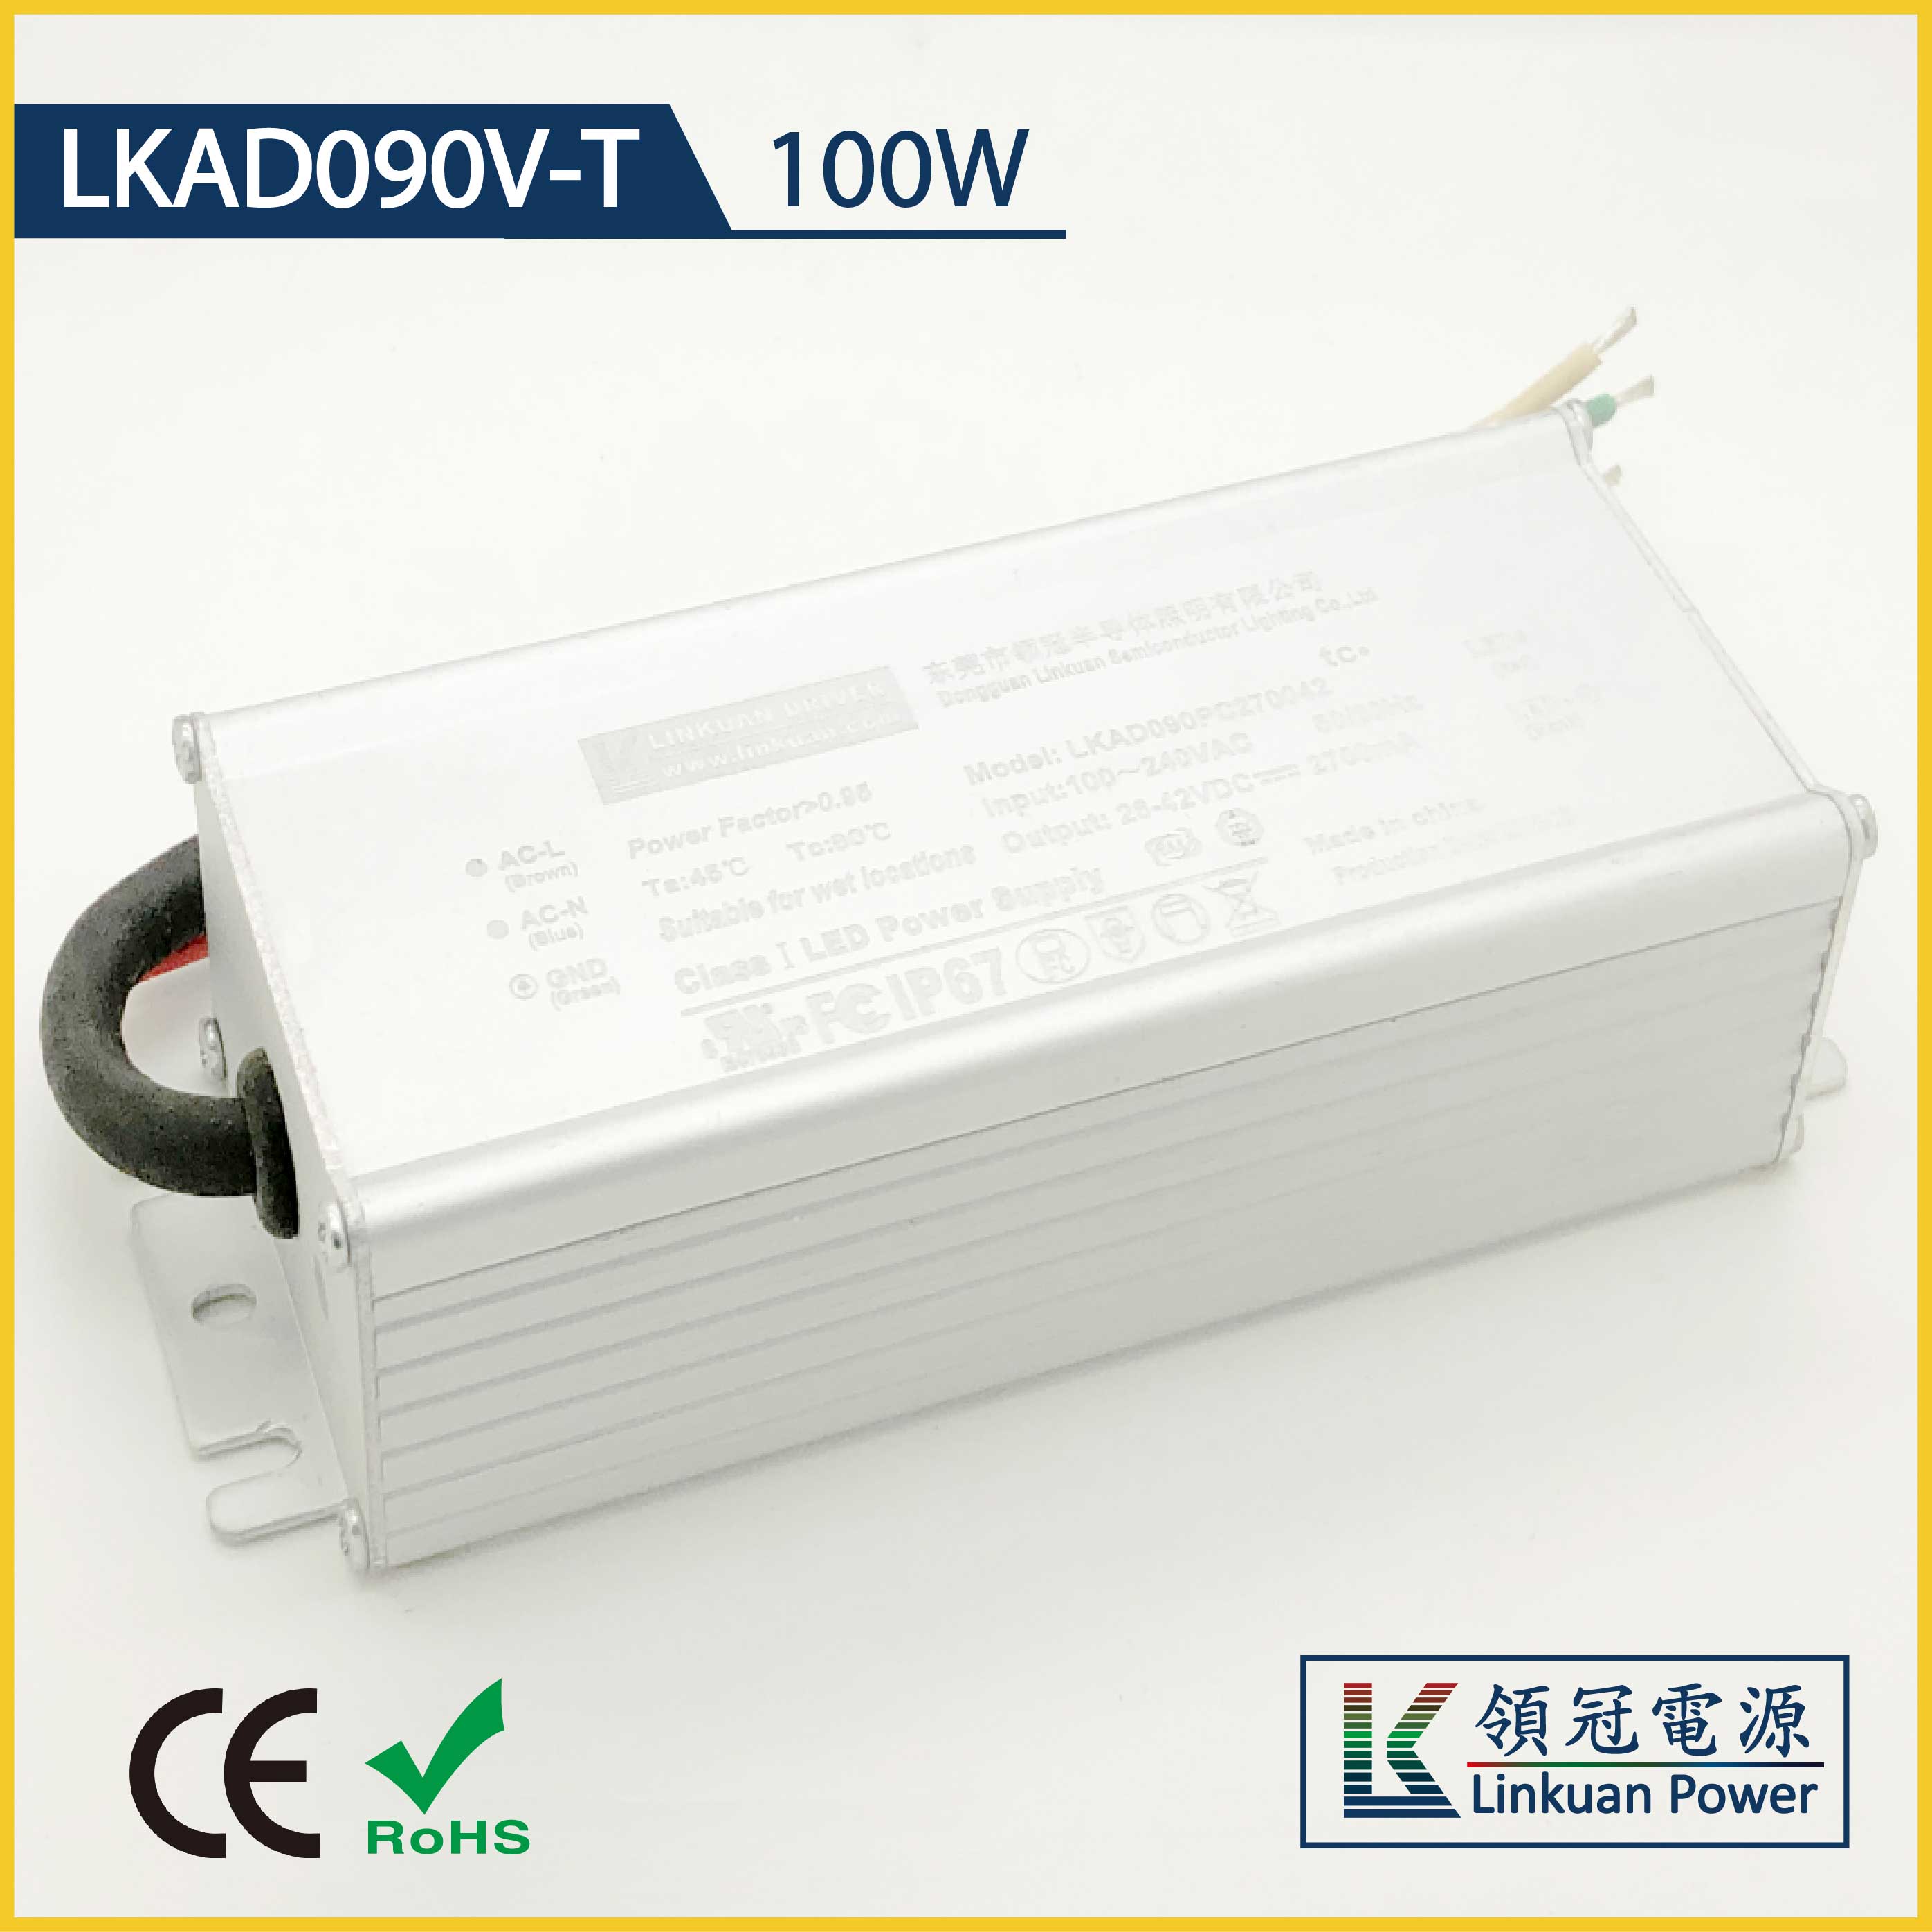 LKAD090V-TD 60W constant voltage 12/24V 10A/5A triac dimmable led driver